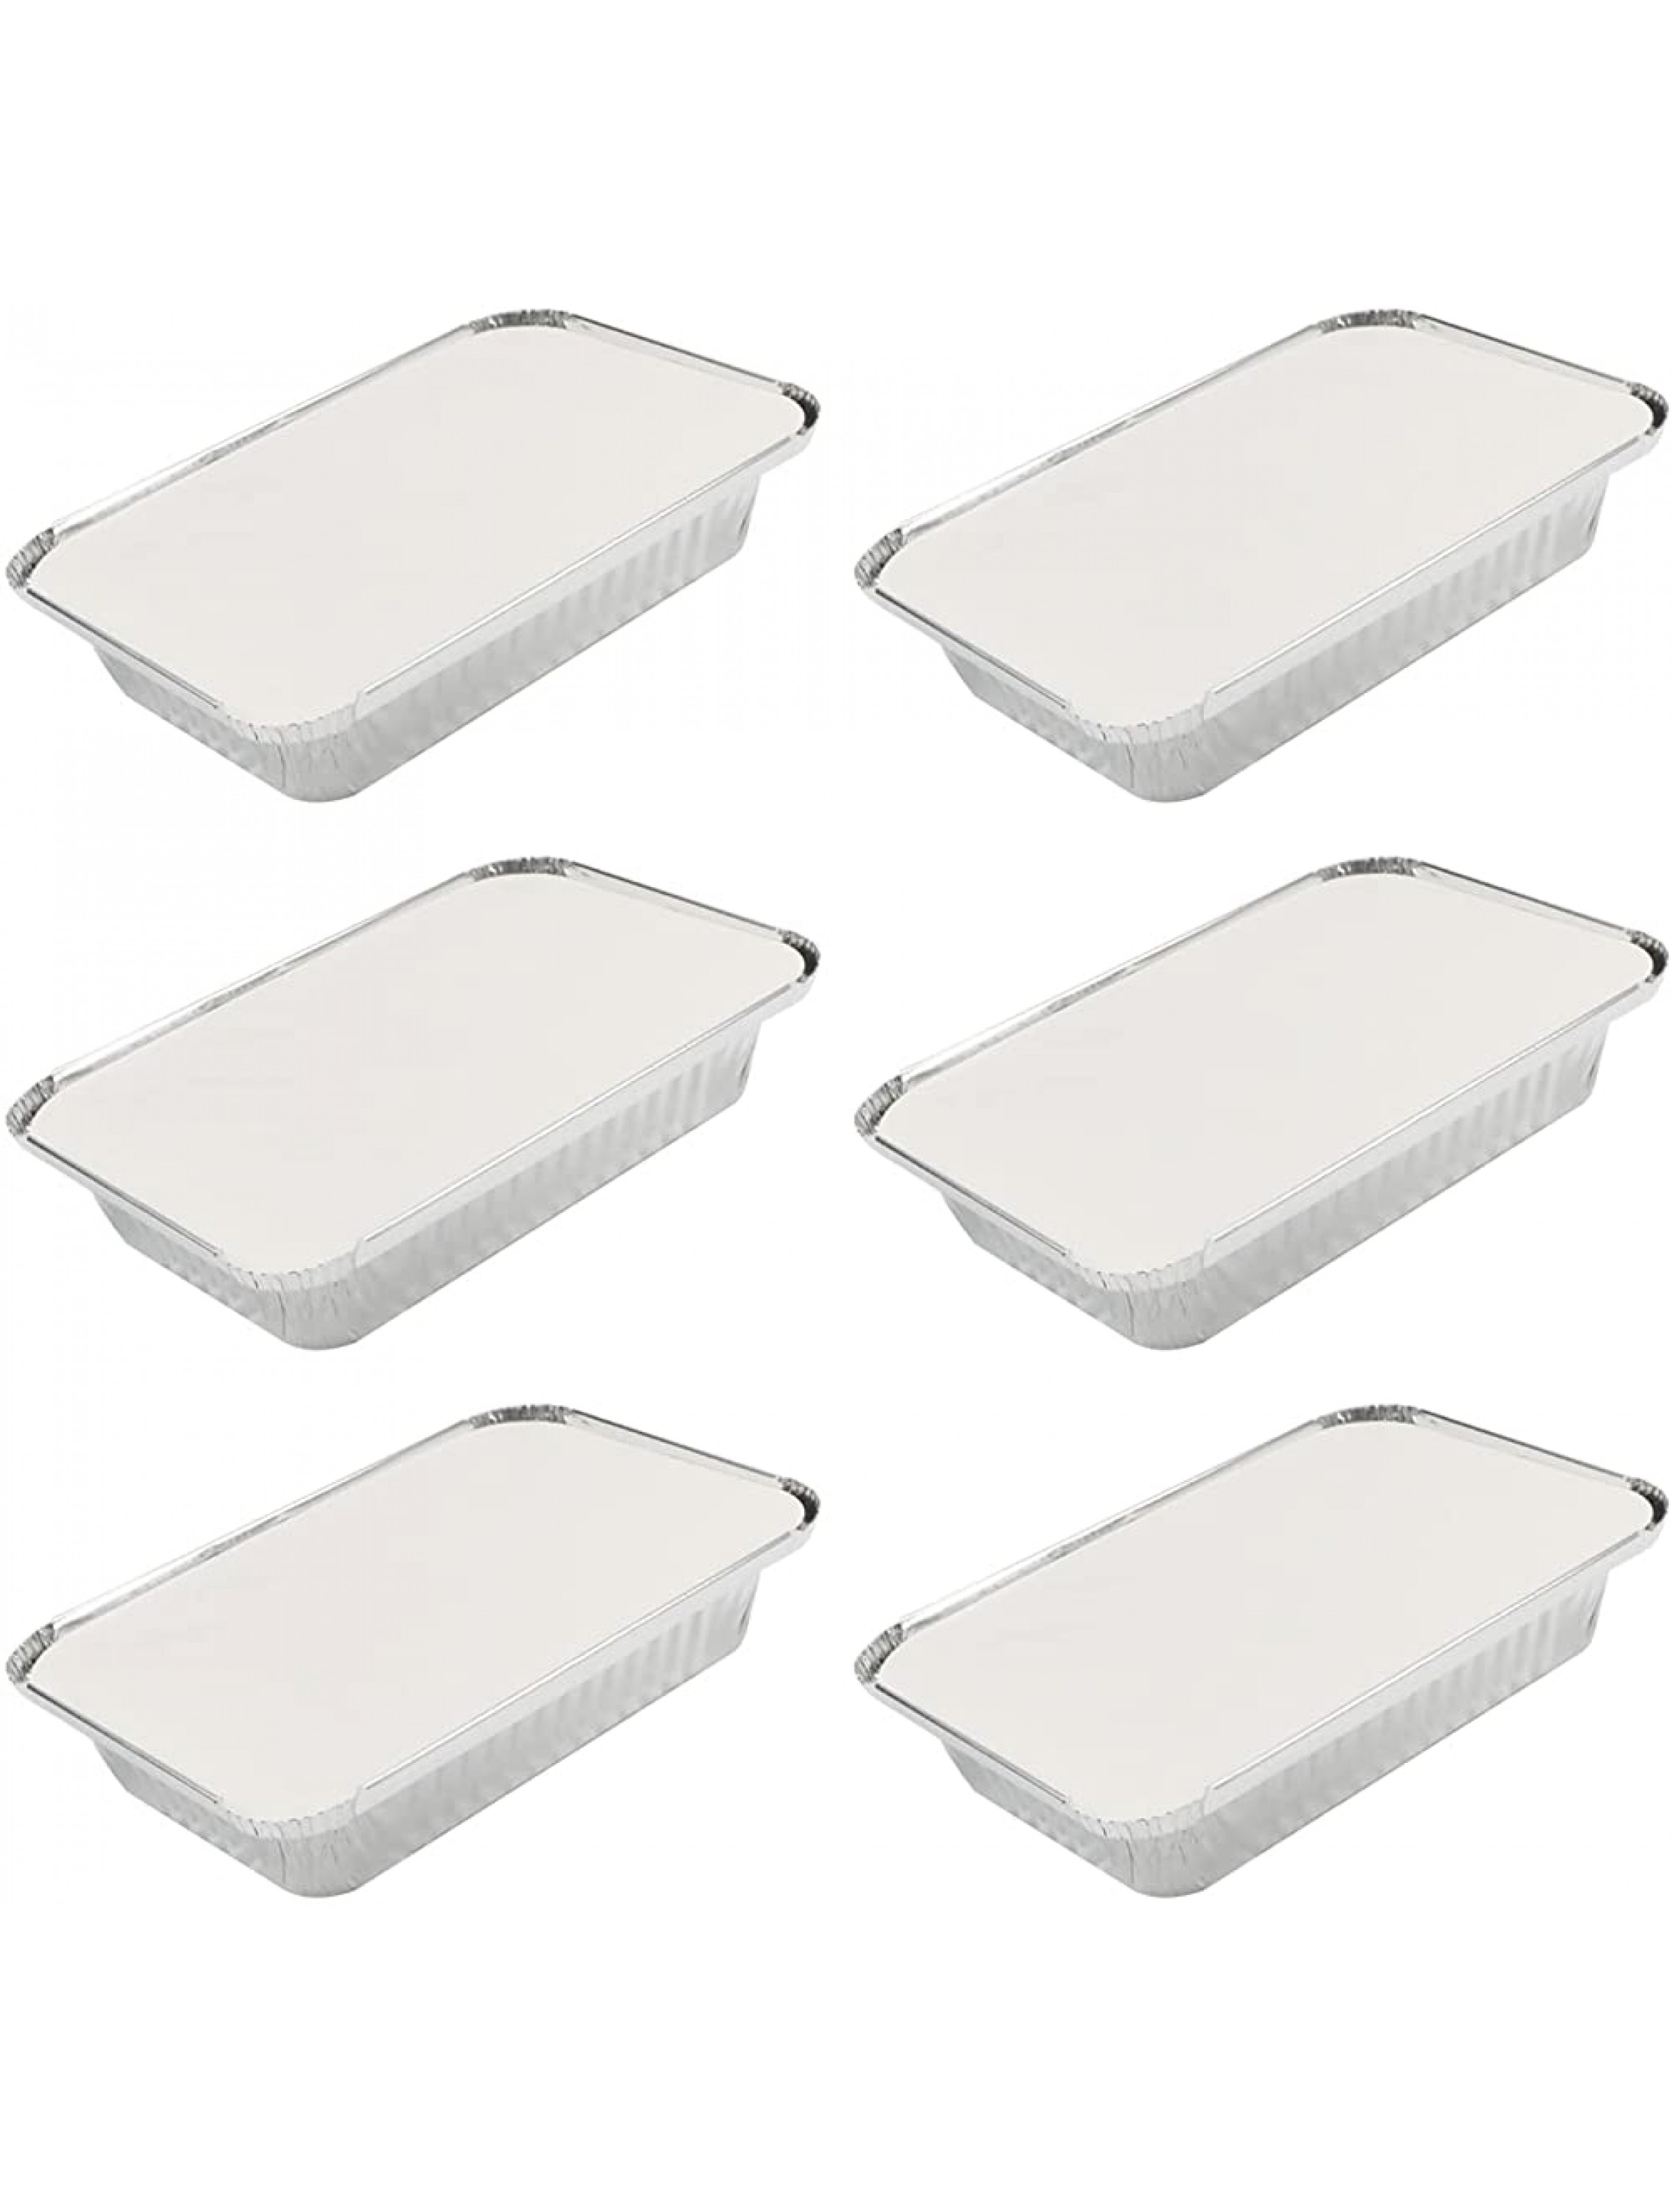 Aicosineg Aluminum Pans 75 Pack Disposable Foil Pans Cookware Great for Baking Cooking Grilling Serving & Lining Steam Table Trays Chafers - BVL020Y5X